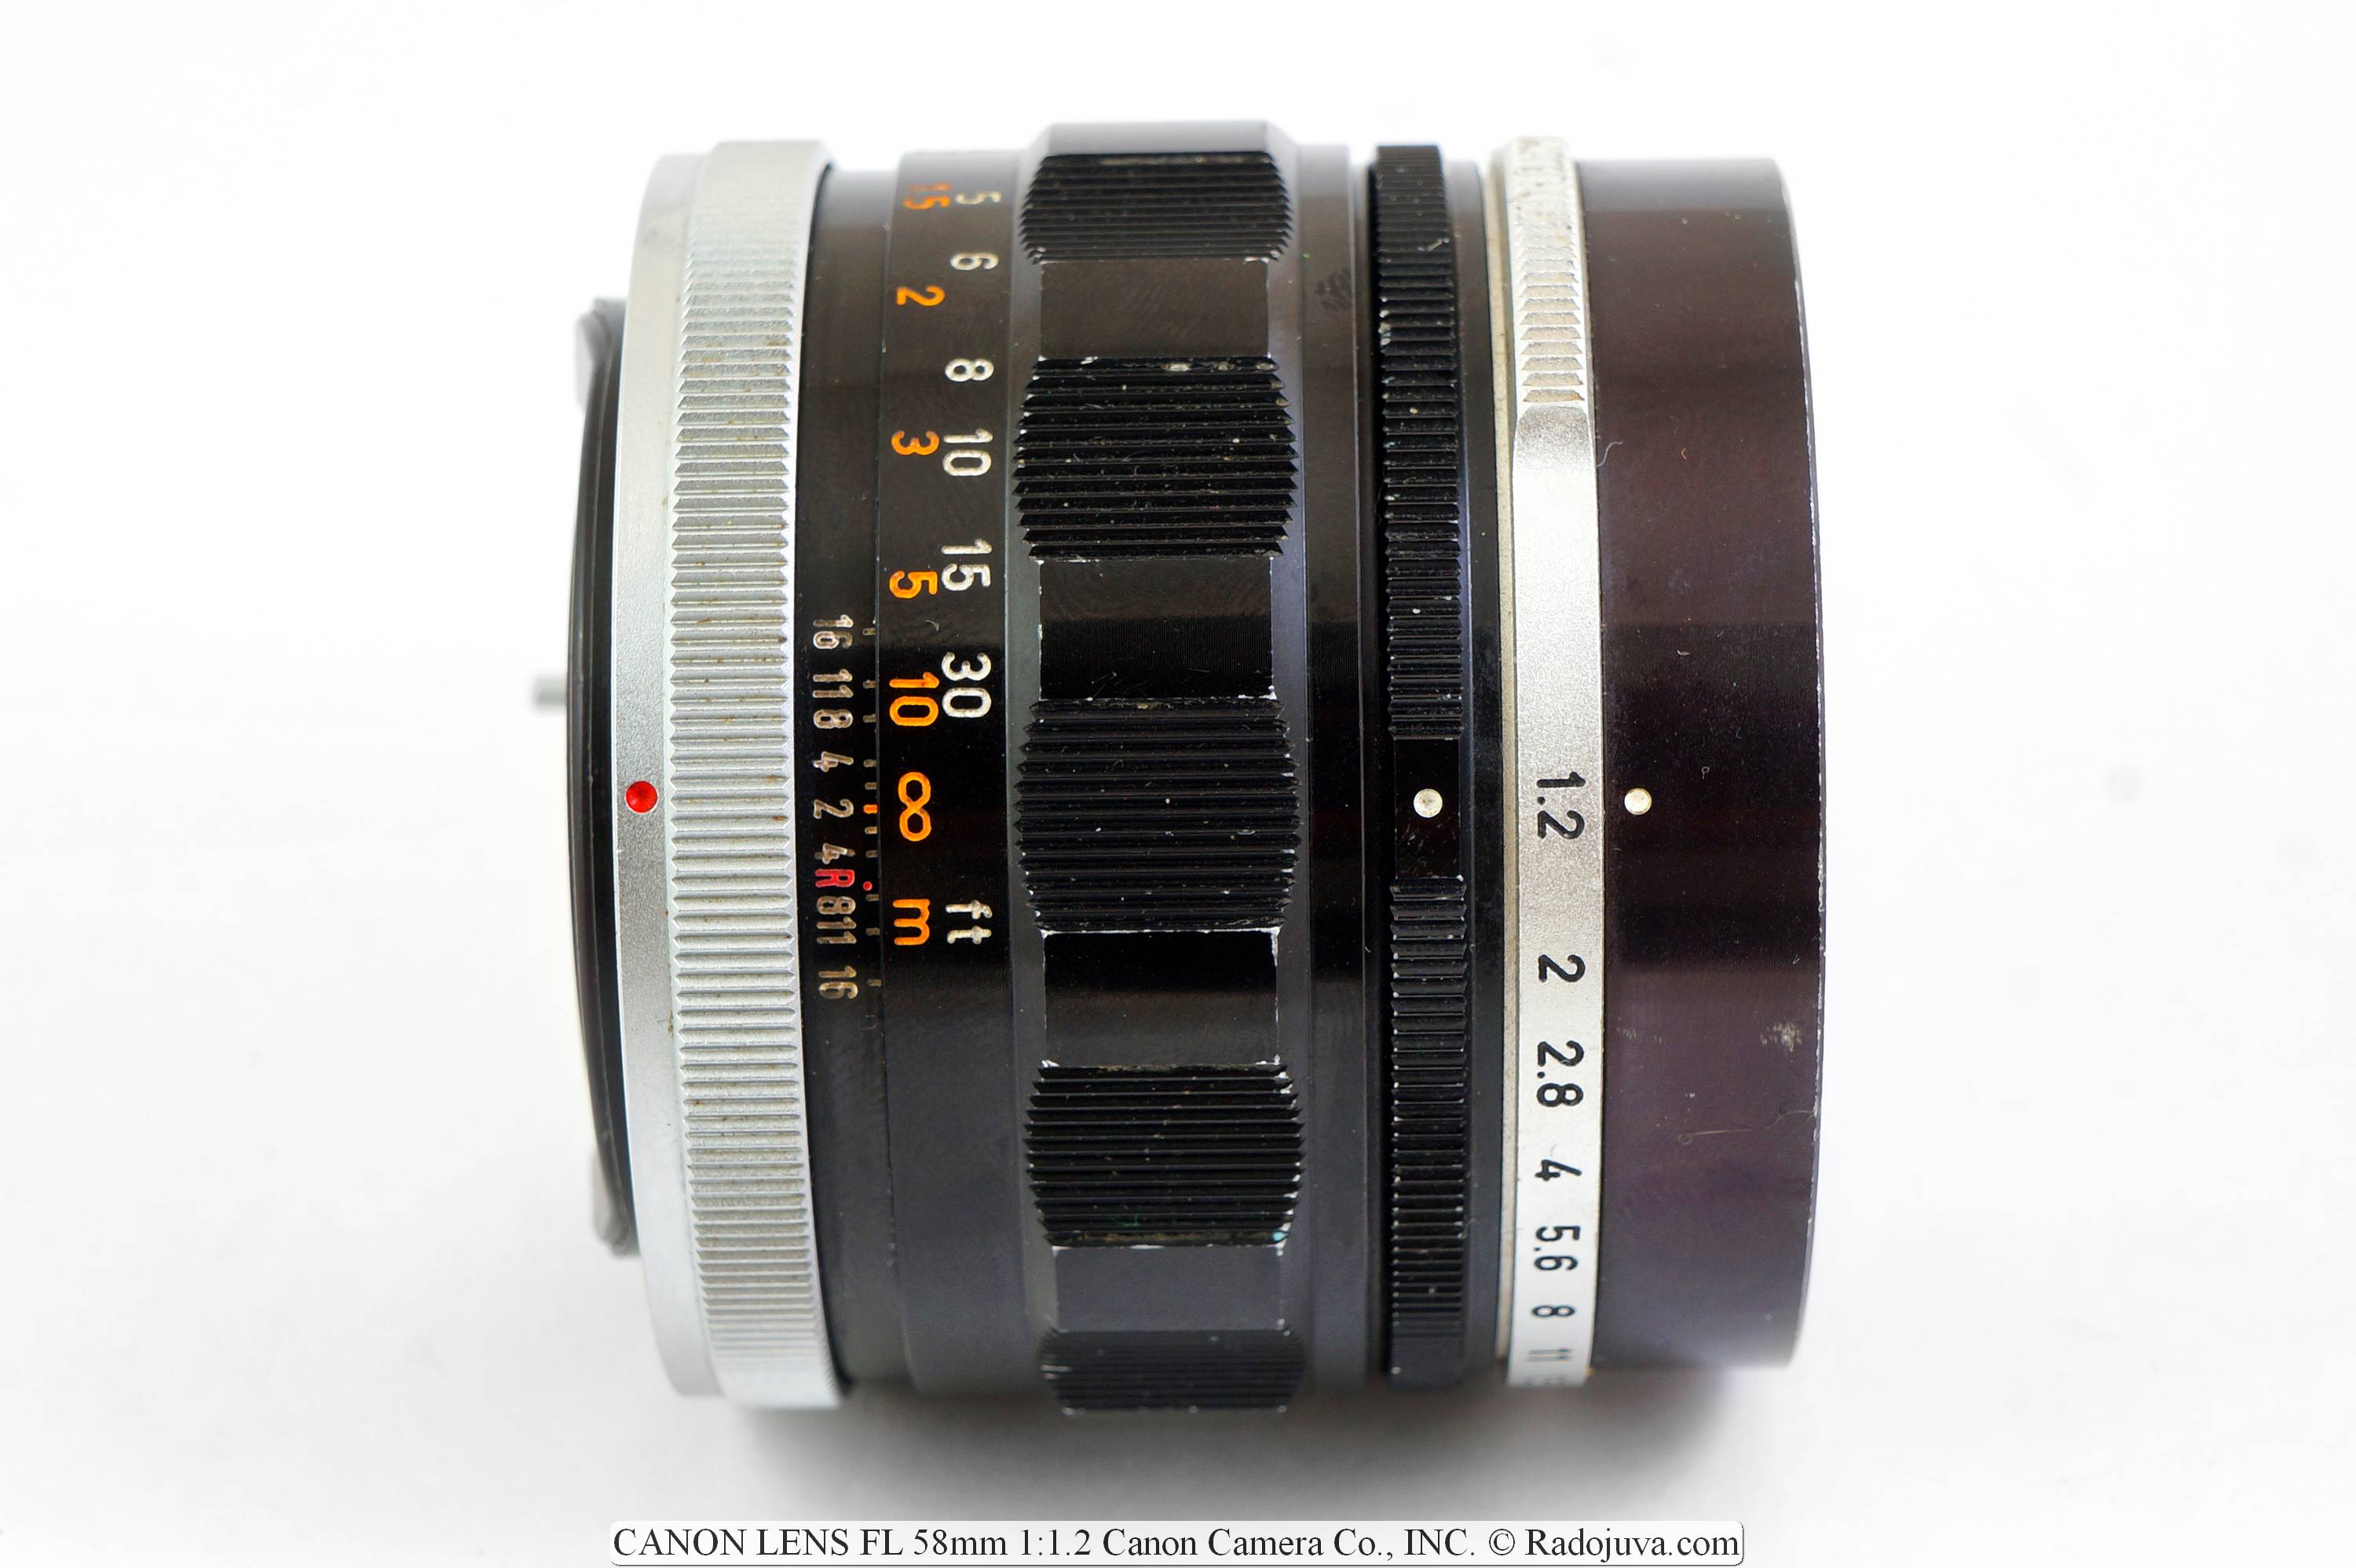 Quick Review of CANON LENS FL 58mm 1:1.2 Canon Camera Co., INC 